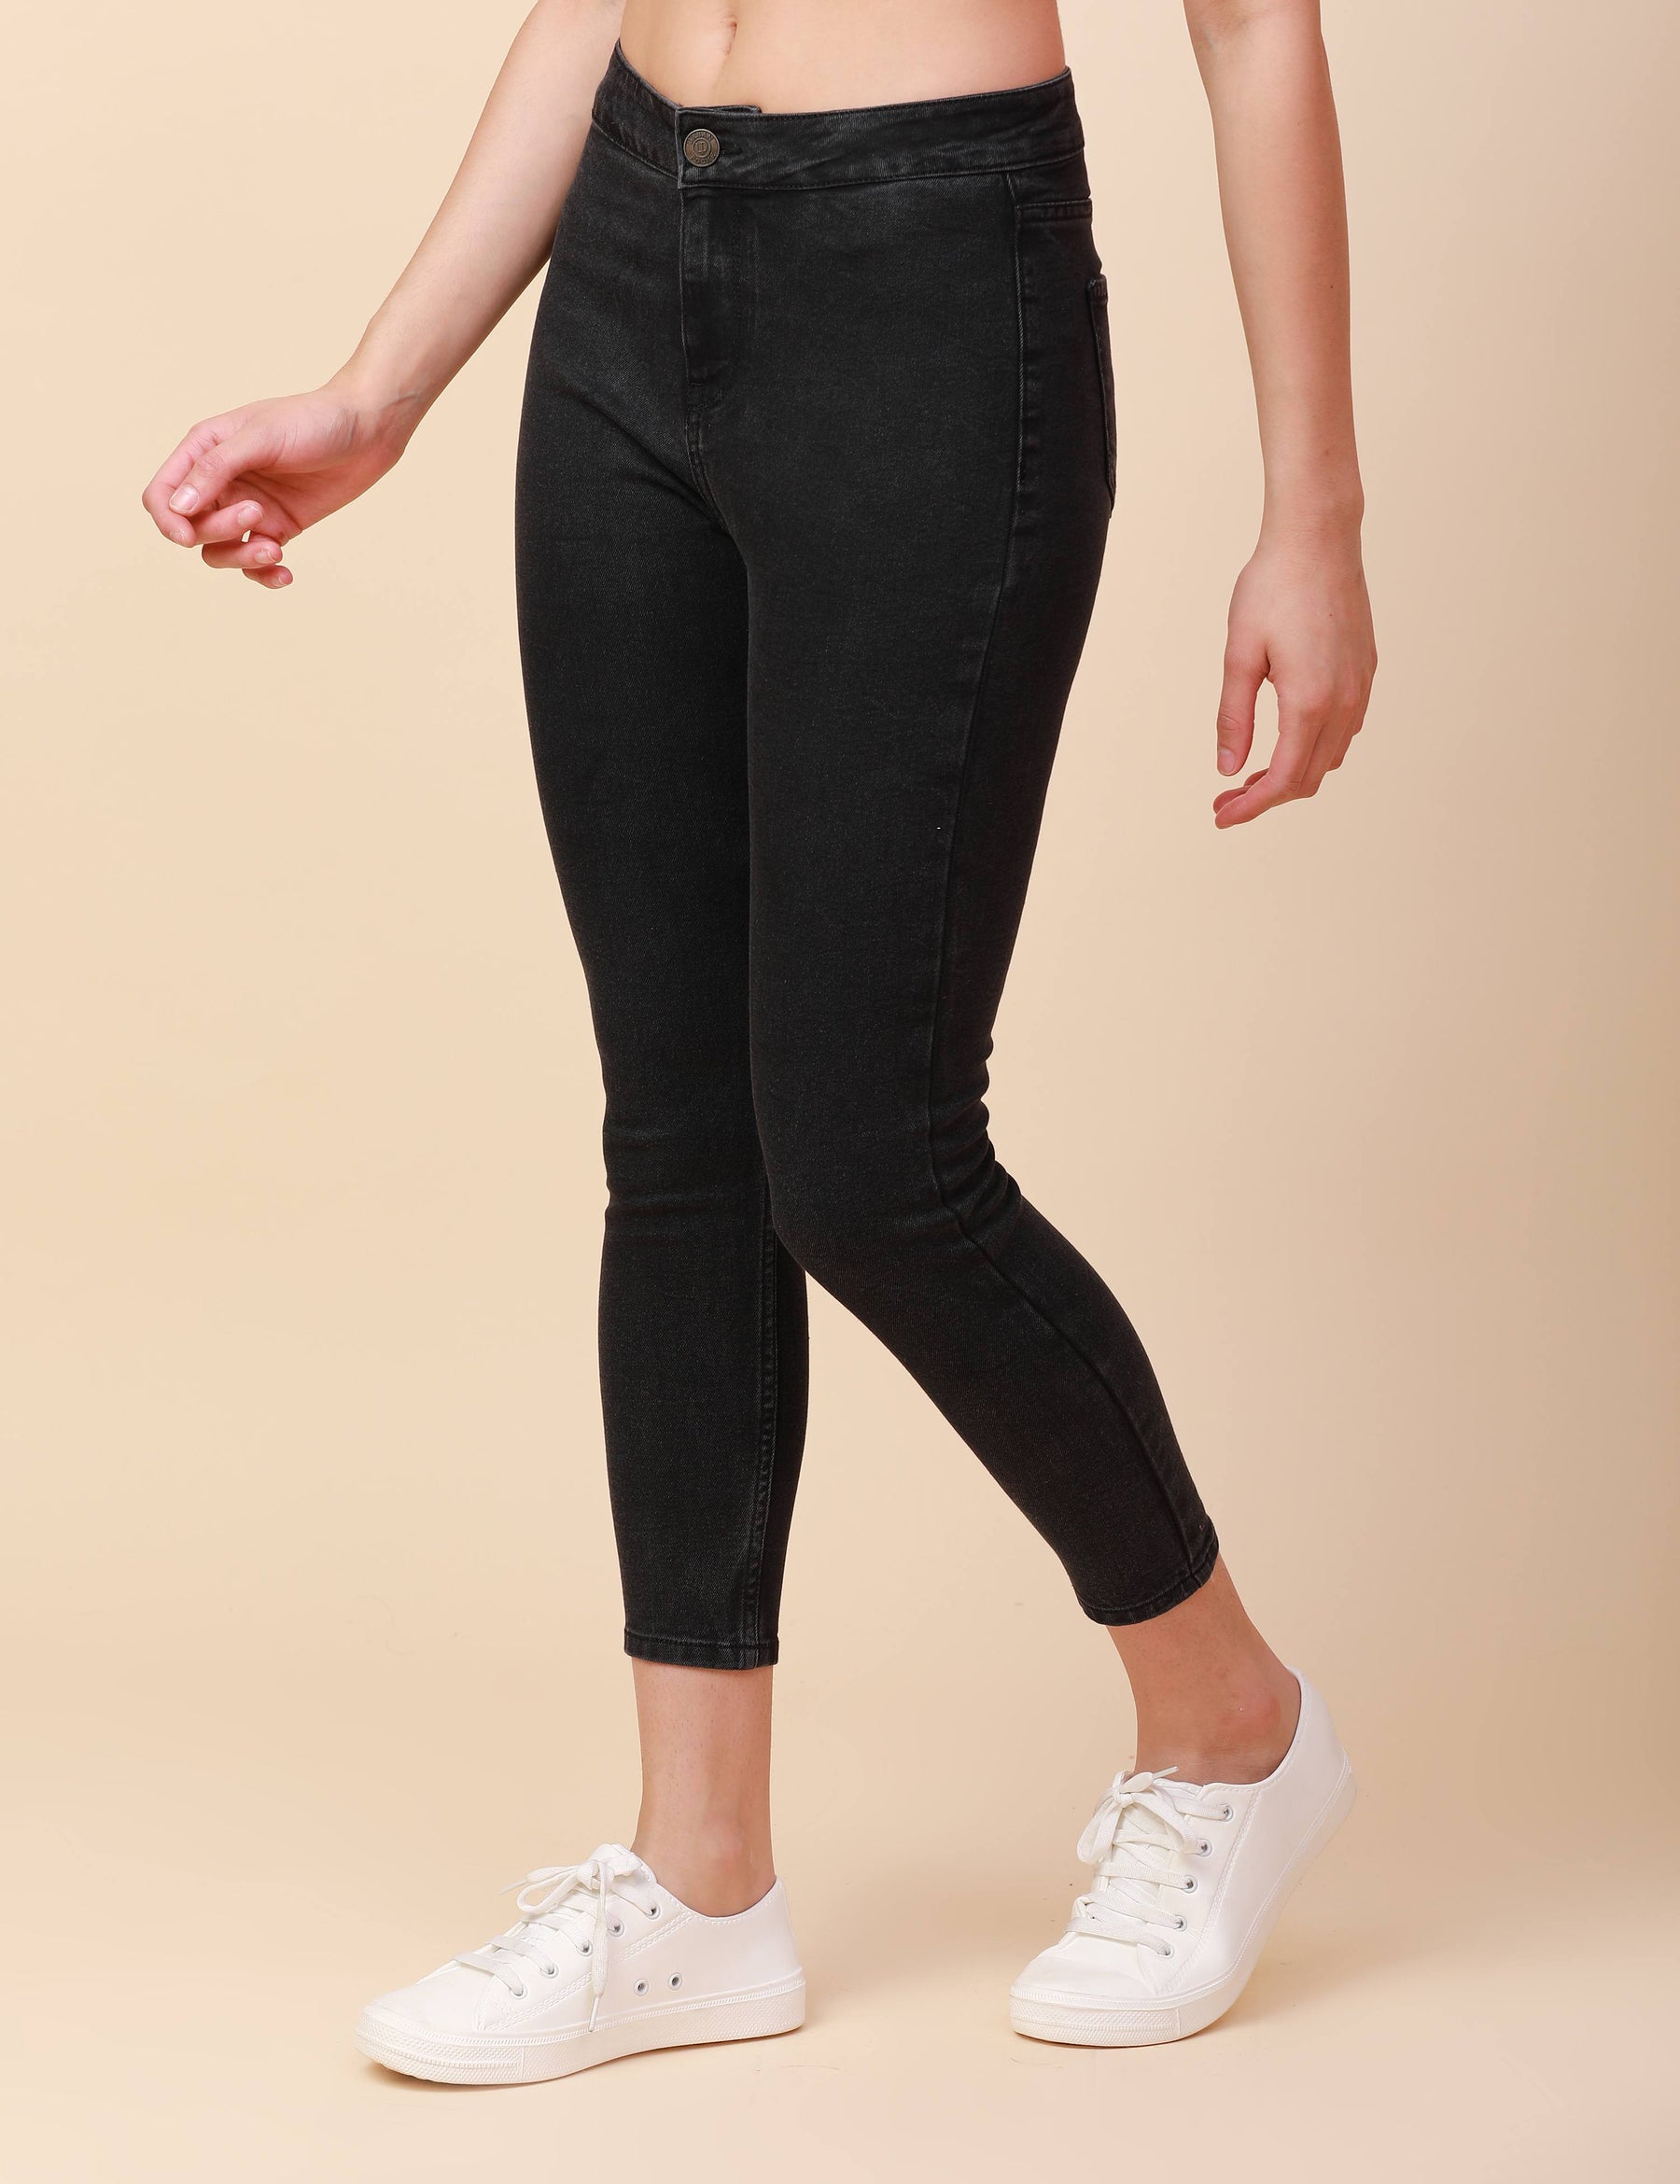 Skinny Charcoal Black High Waist Jeans Ankle Fit